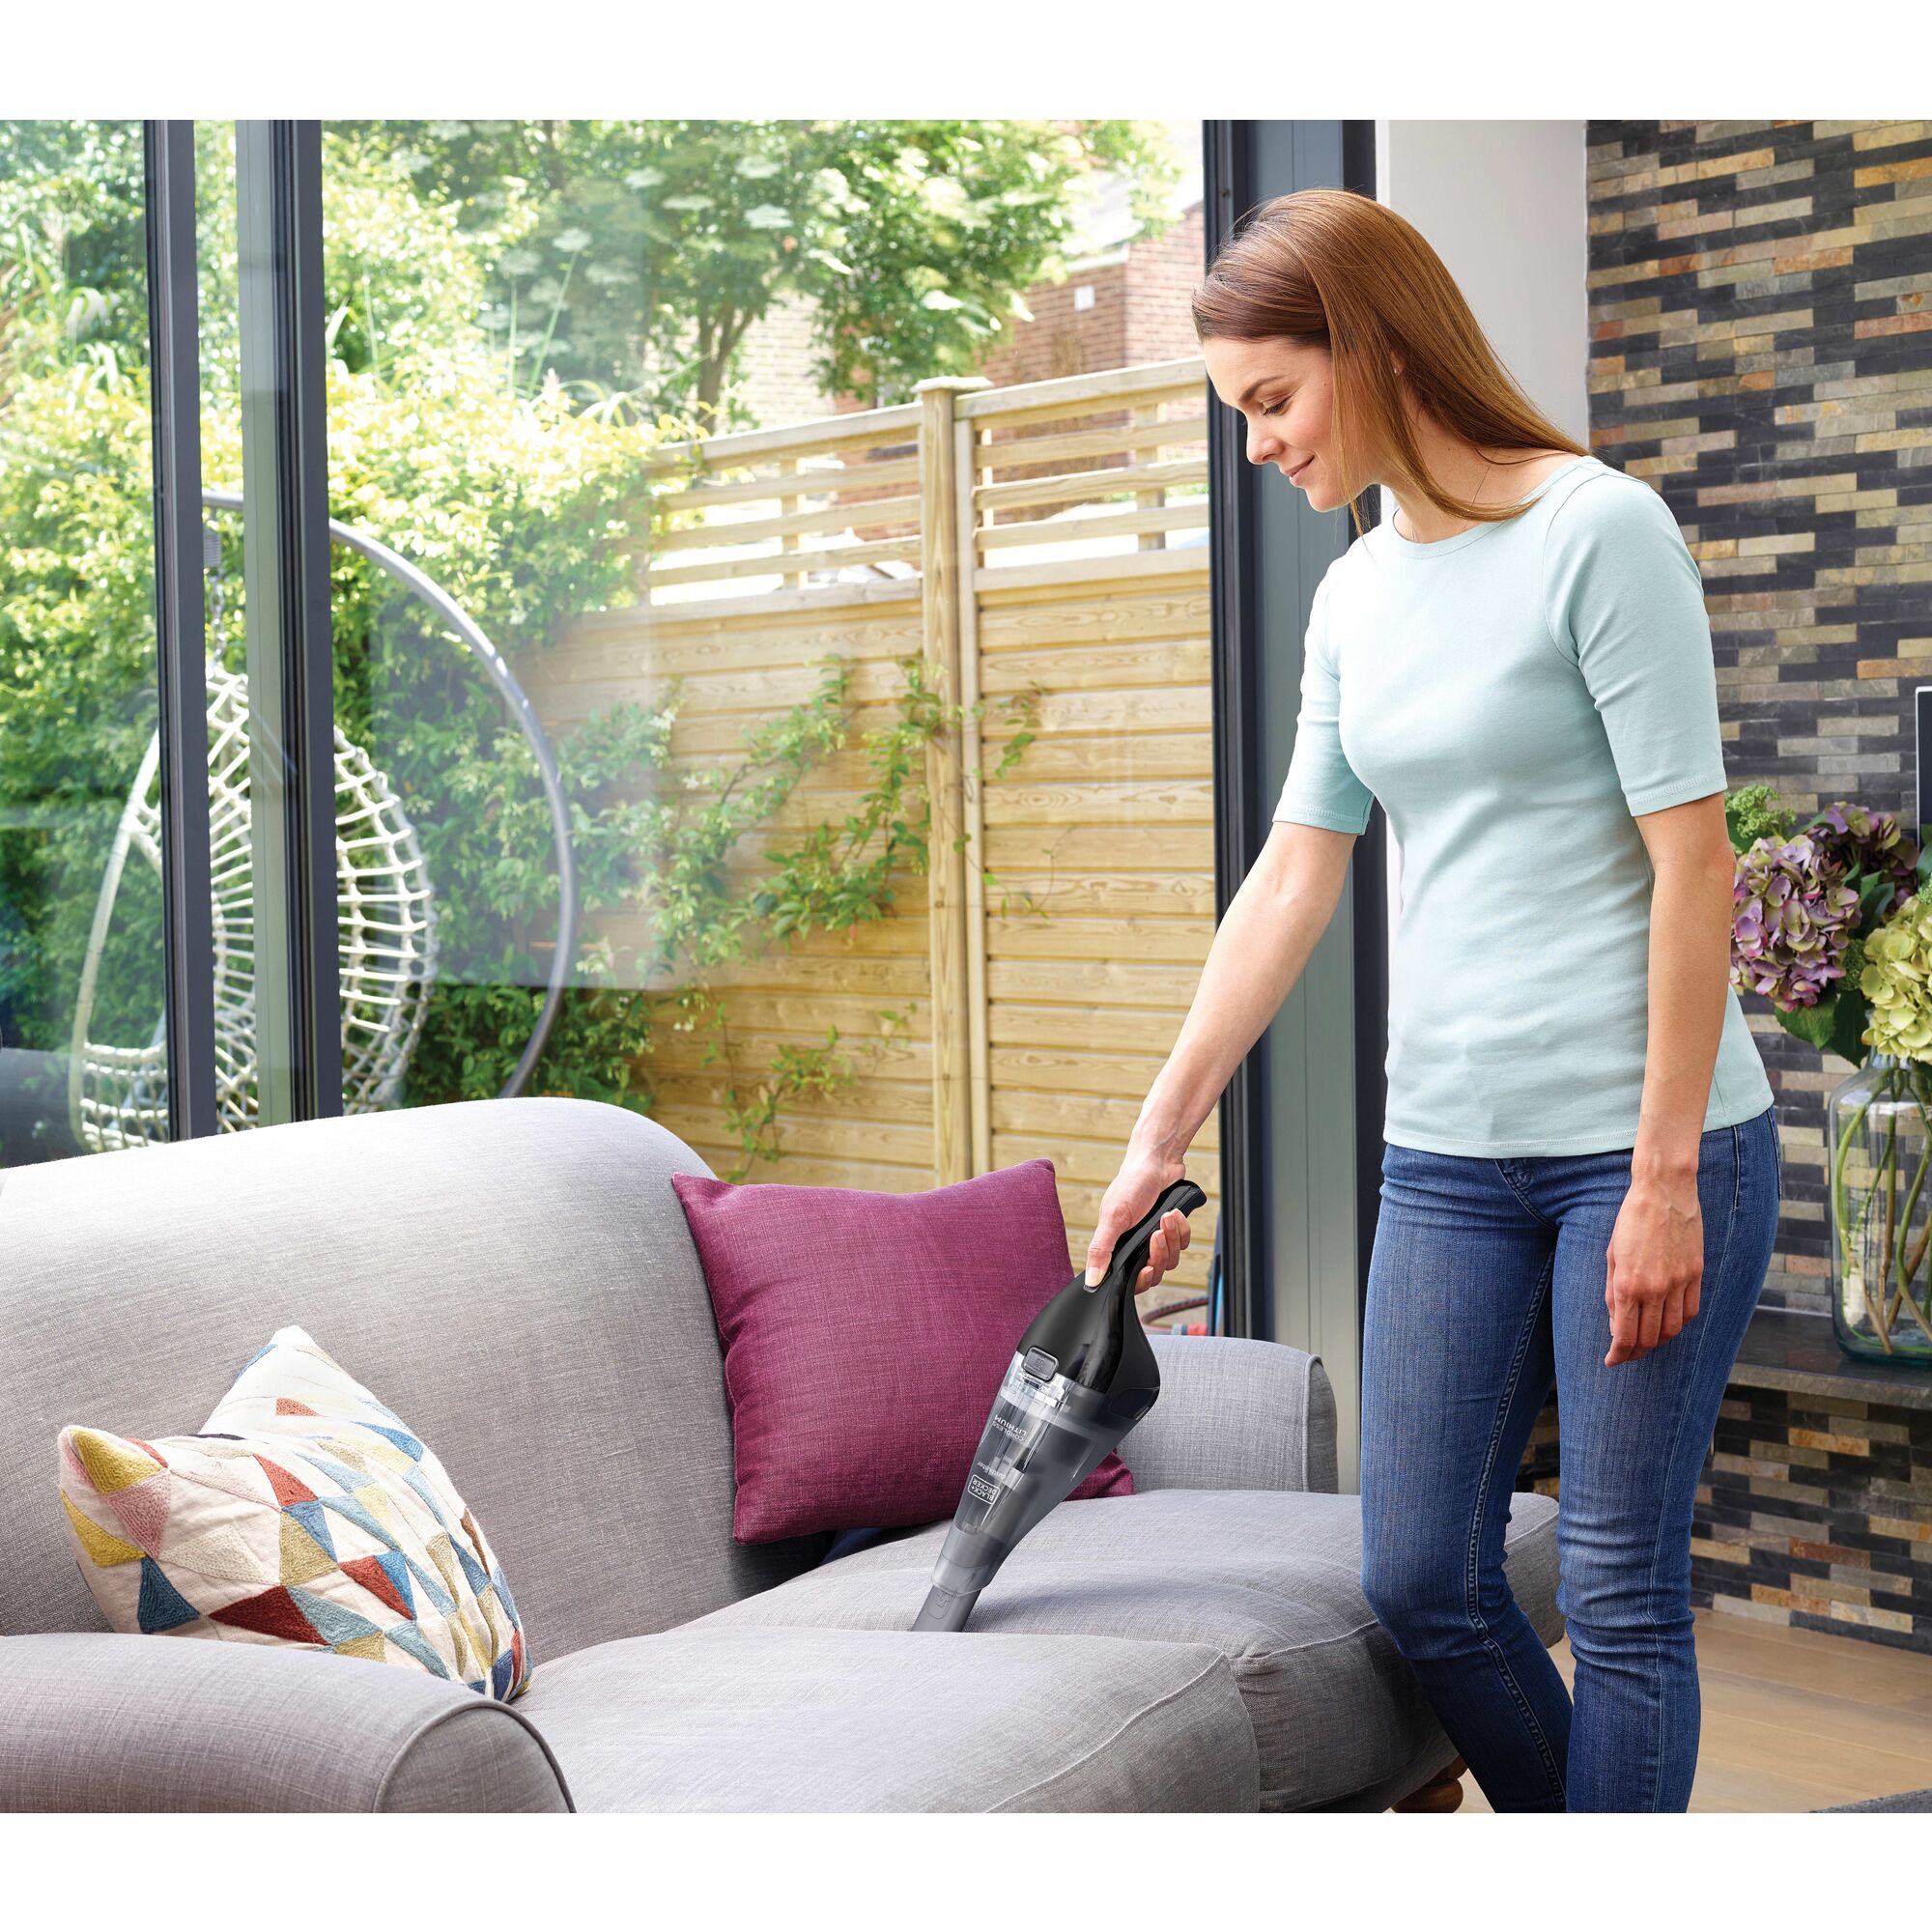 dustbuster QuickClean cordless hand vacuum being used by a person to clean couch.